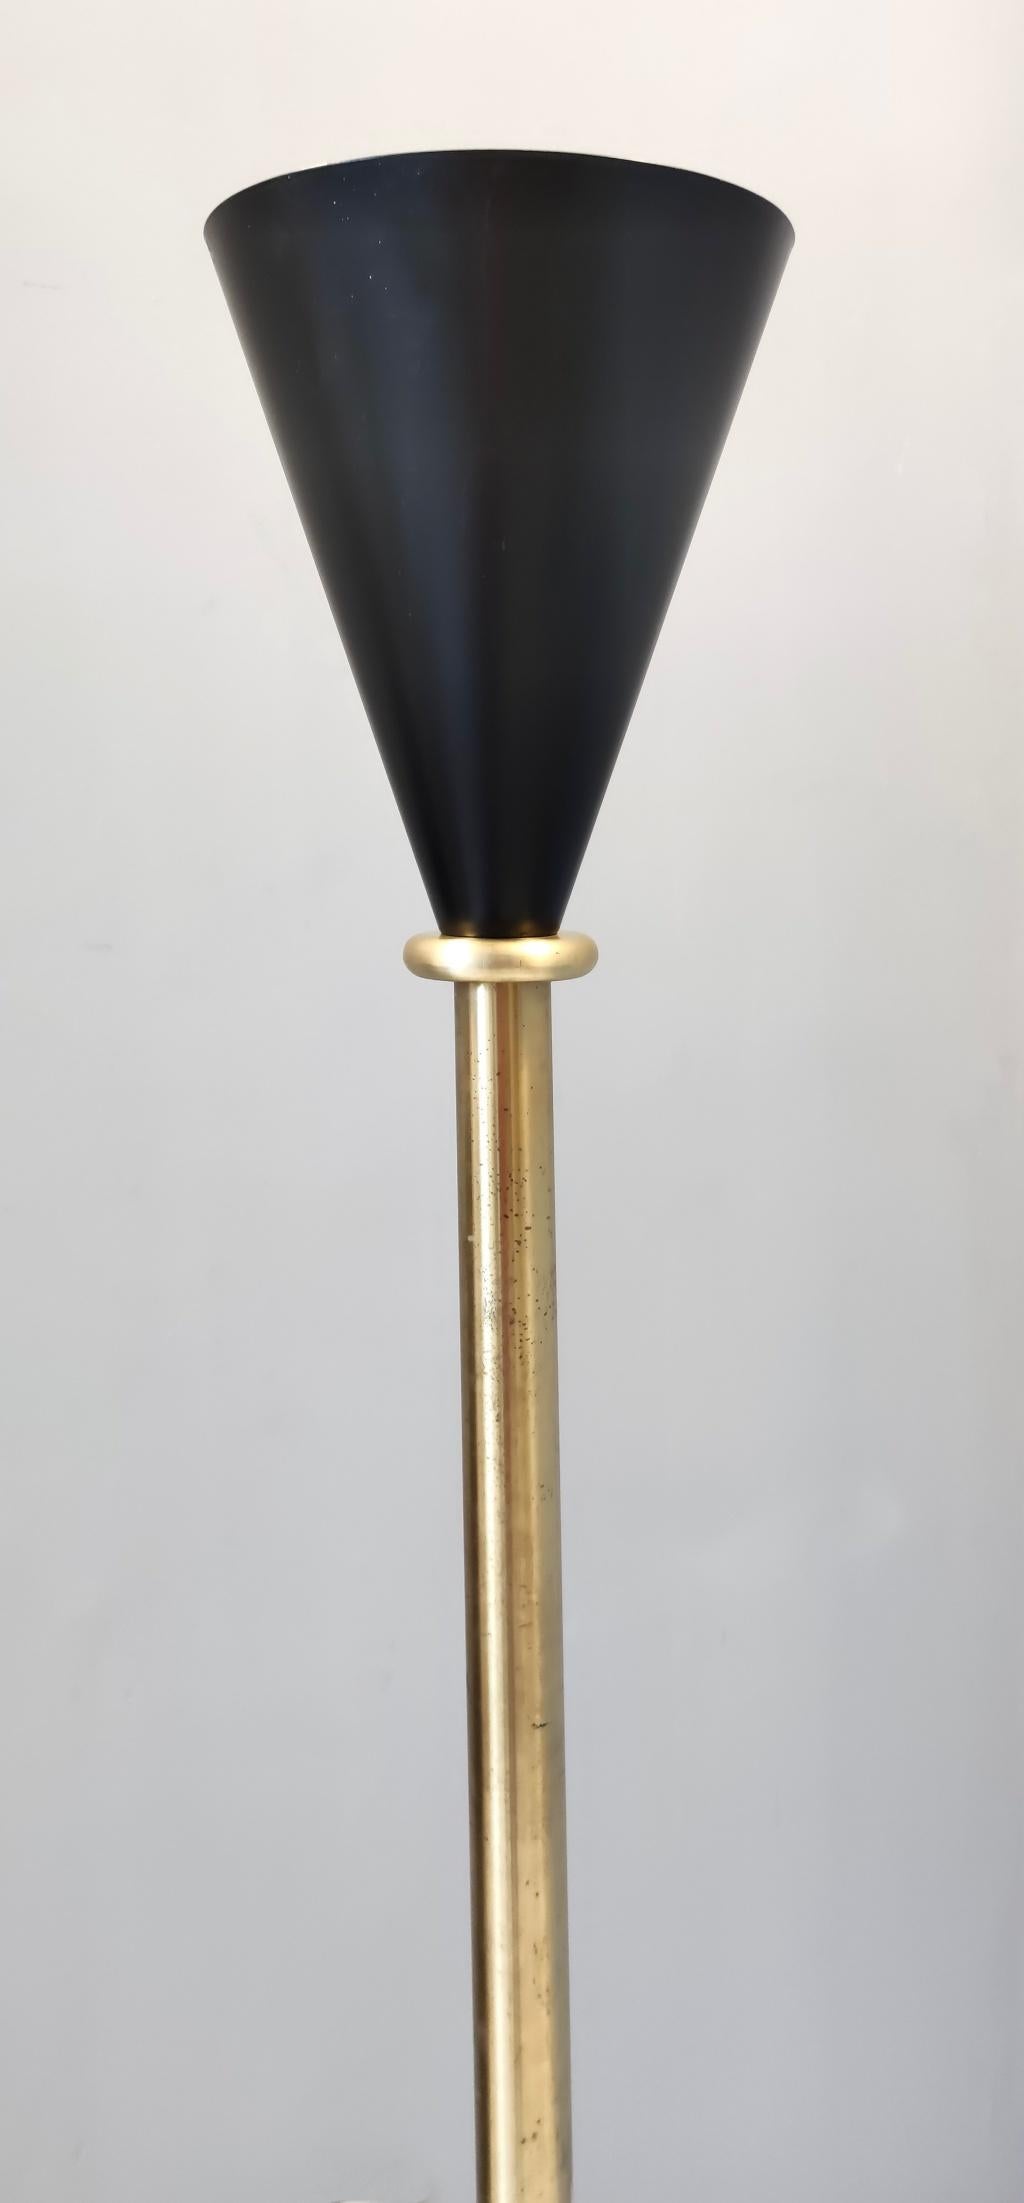 Mid-20th Century Vintage Brass and Black Varnished Aluminum Floor Lamp, Italy For Sale